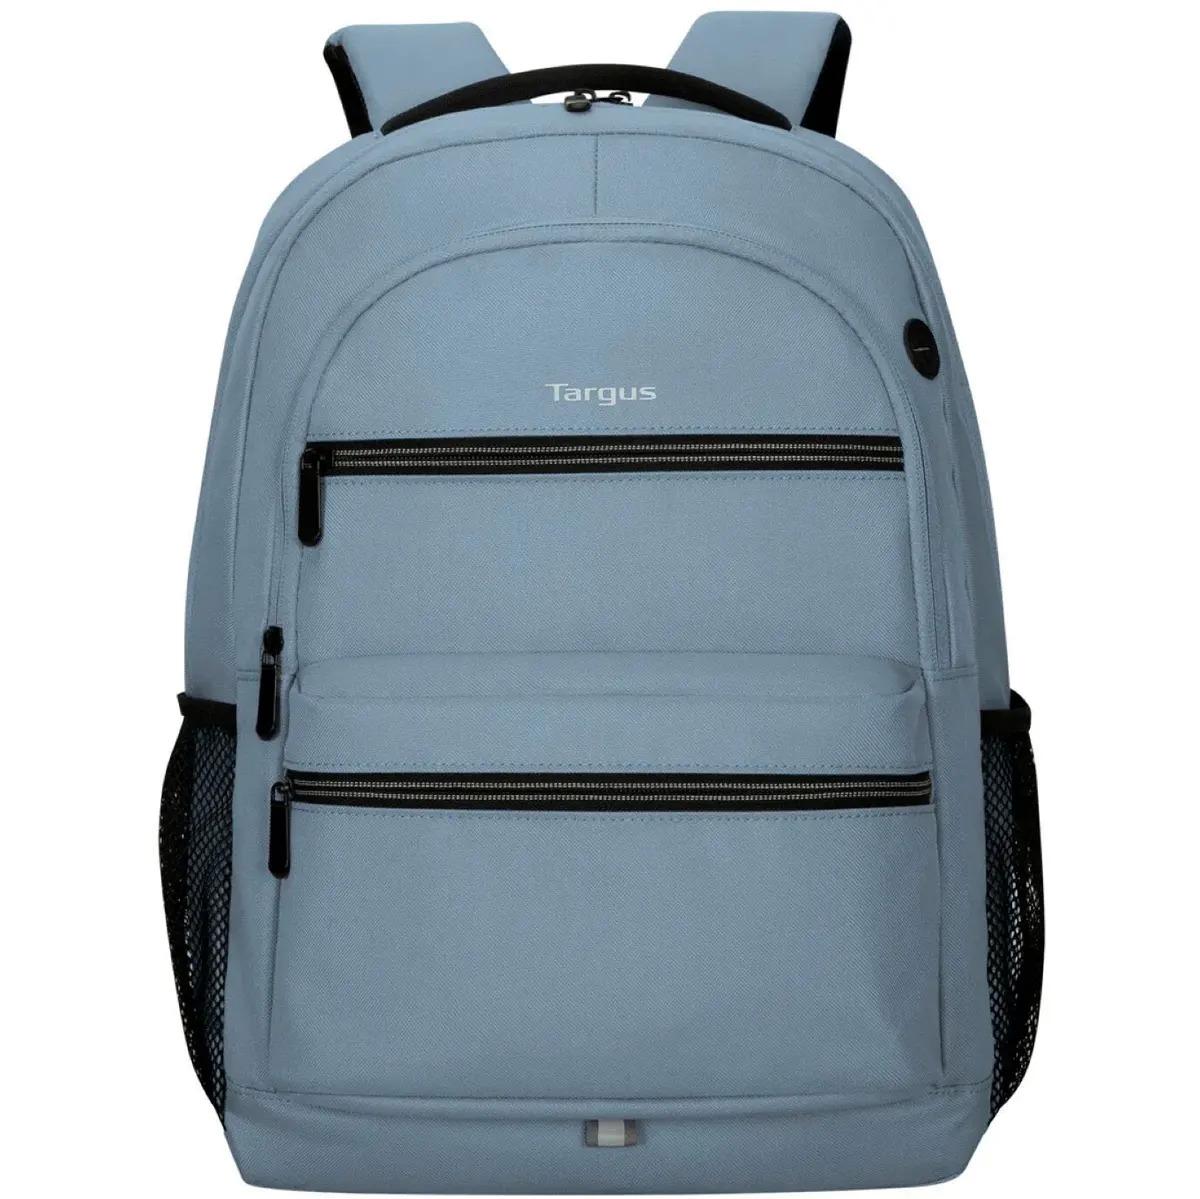 Targus Octave II 15.6in Laptop Backpack for $11.99 Shipped